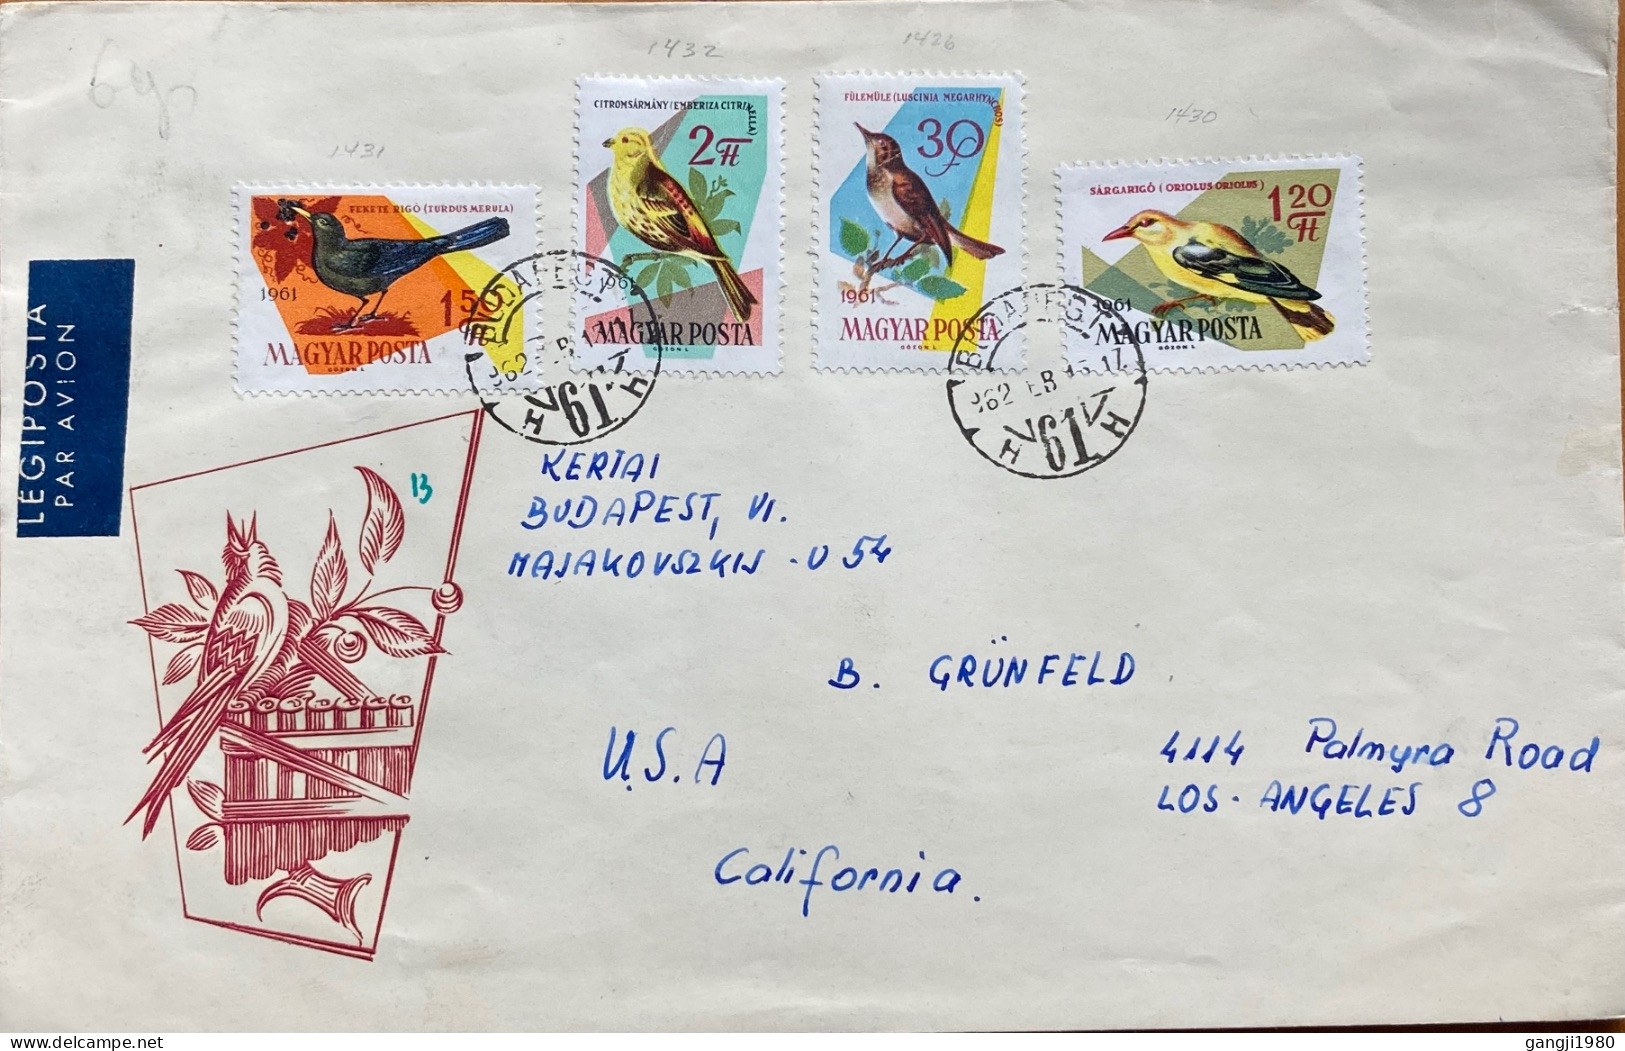 HUNGARY 1968, COVER ILLUSTRATE, AIRMAIL USED TO USA, 4 DIFFERENT BIRD STAMP, BUDAPEST CITY CANCEL. - Briefe U. Dokumente